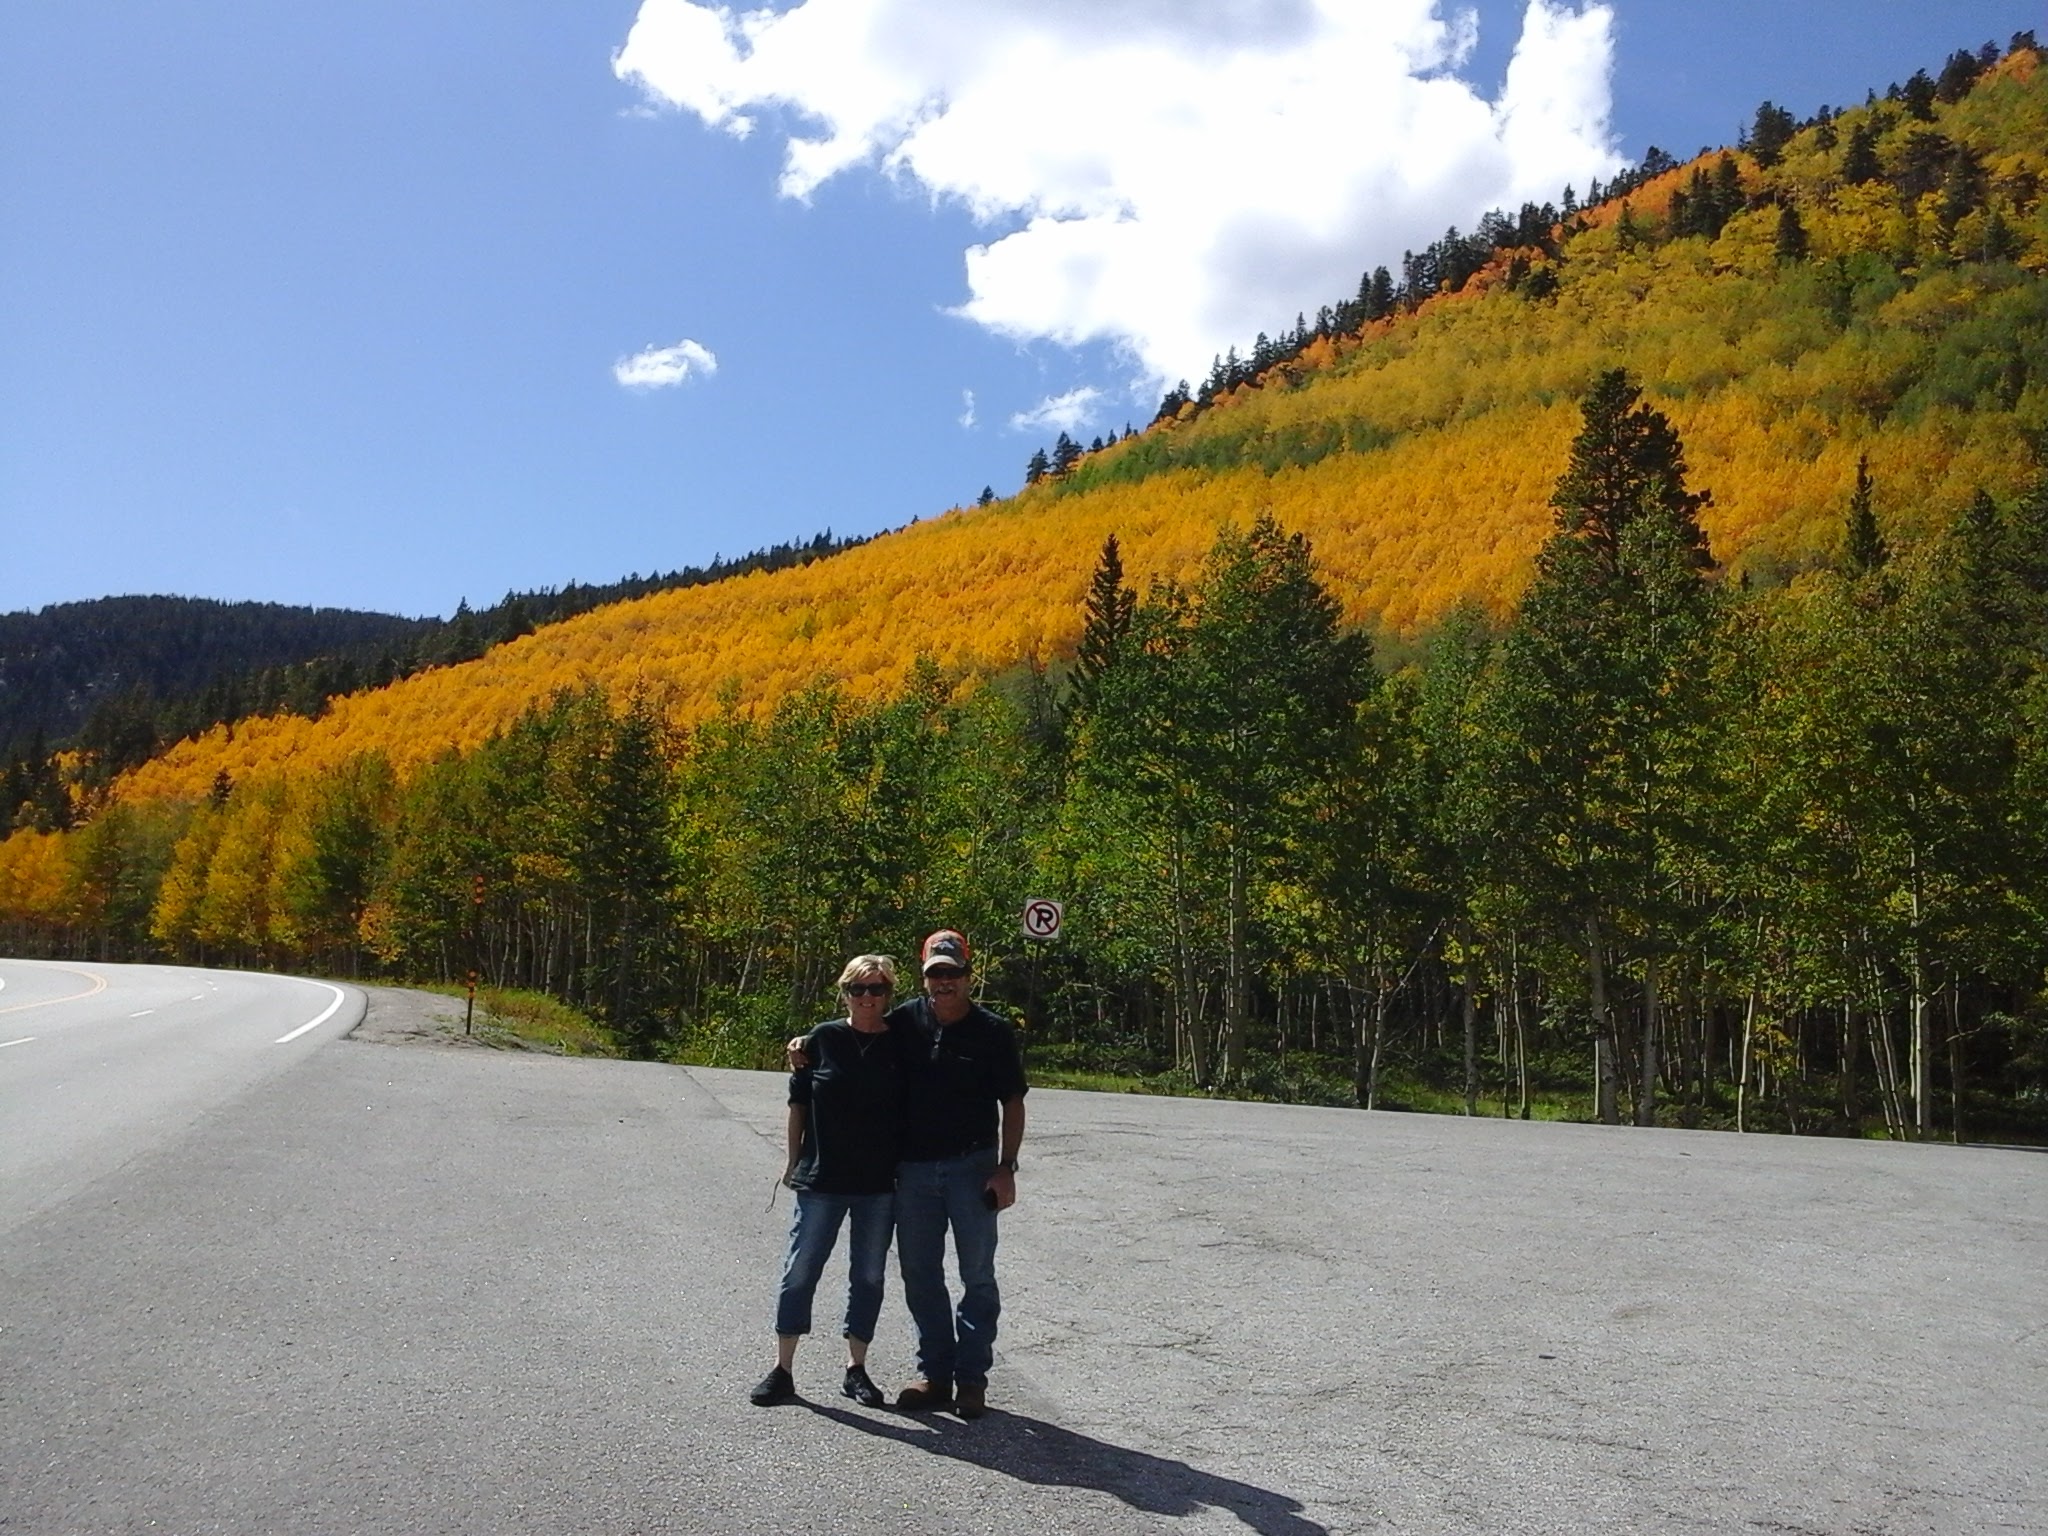 The peak of the fall colors along Monarch Pass with 2 people posing for a photo.